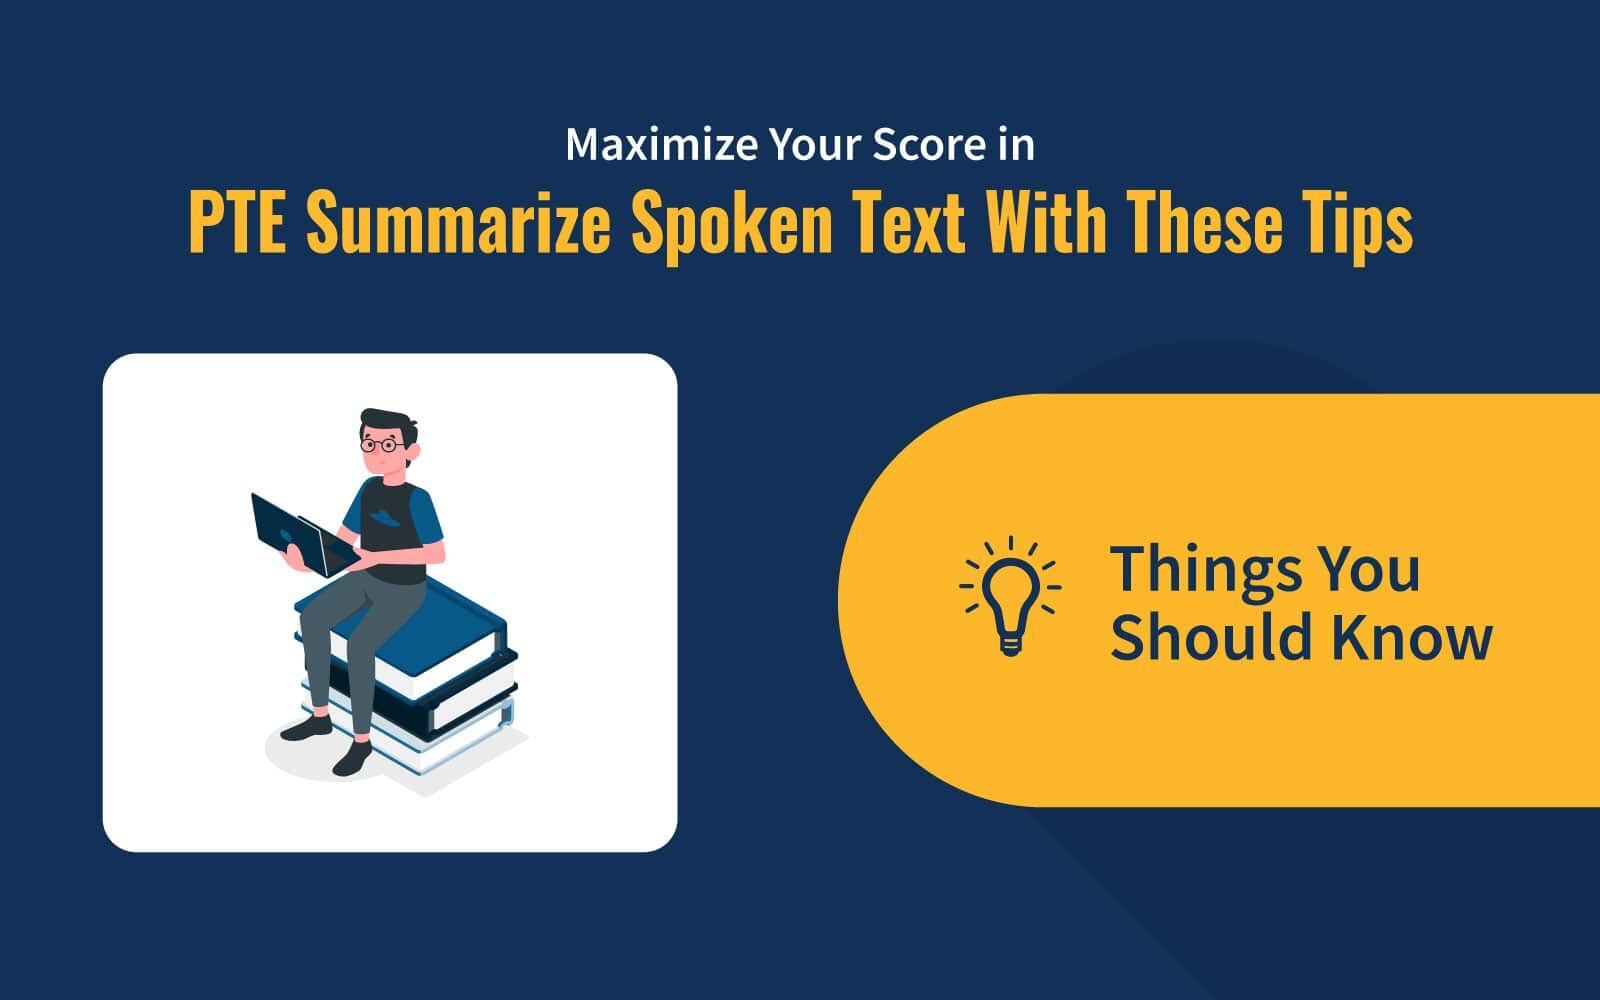 Maximize Your Score in PTE Summarize Spoken Text With These Tips